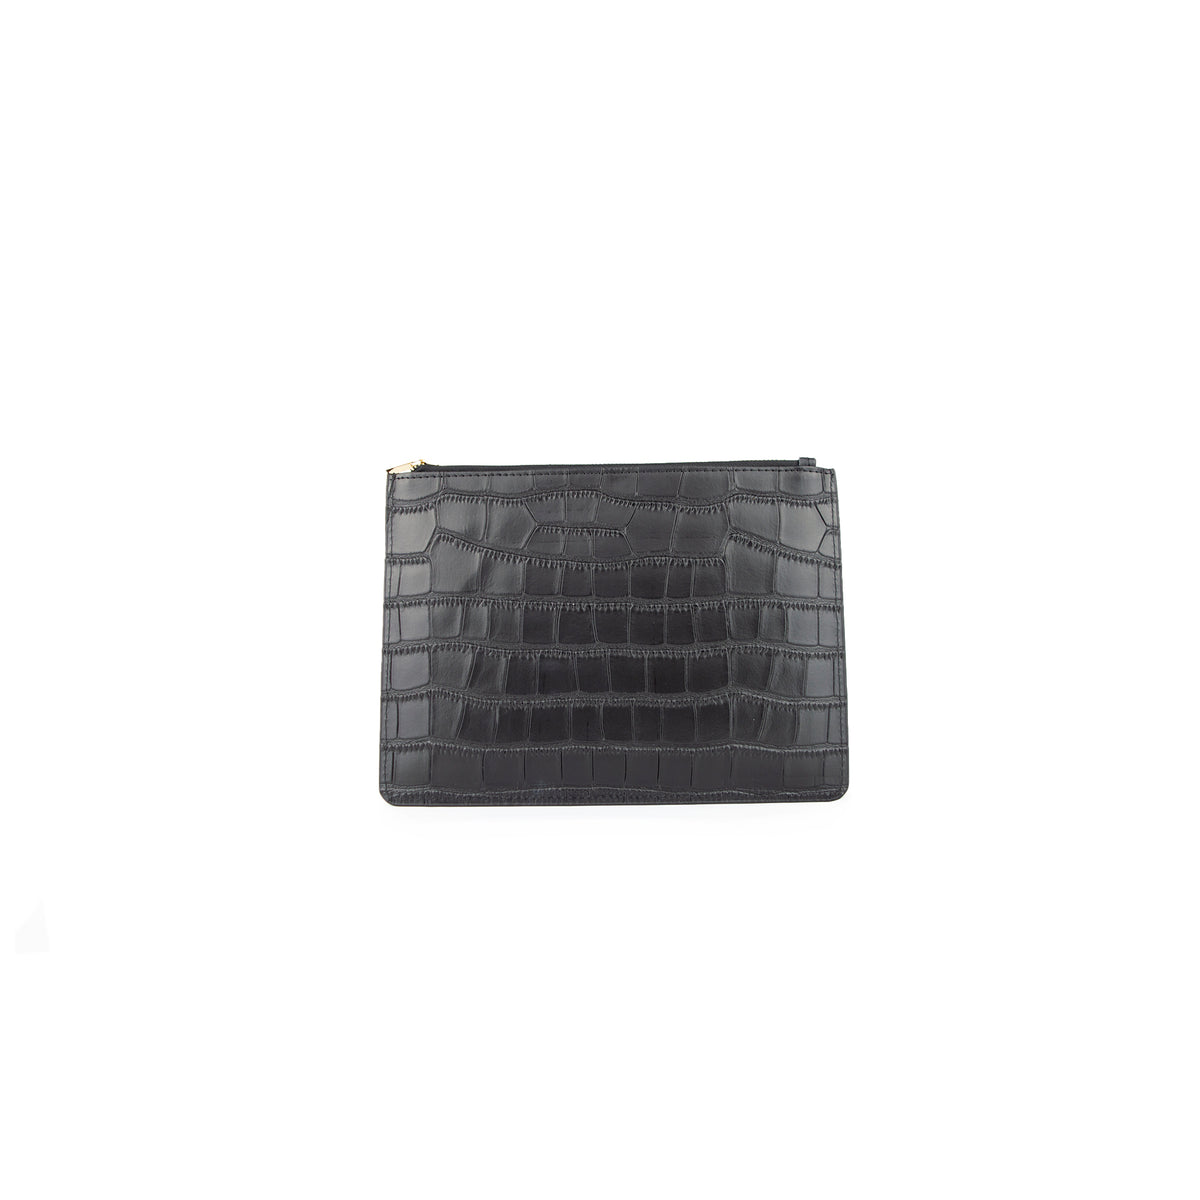 Personalised Pouch - Black Croc Leather